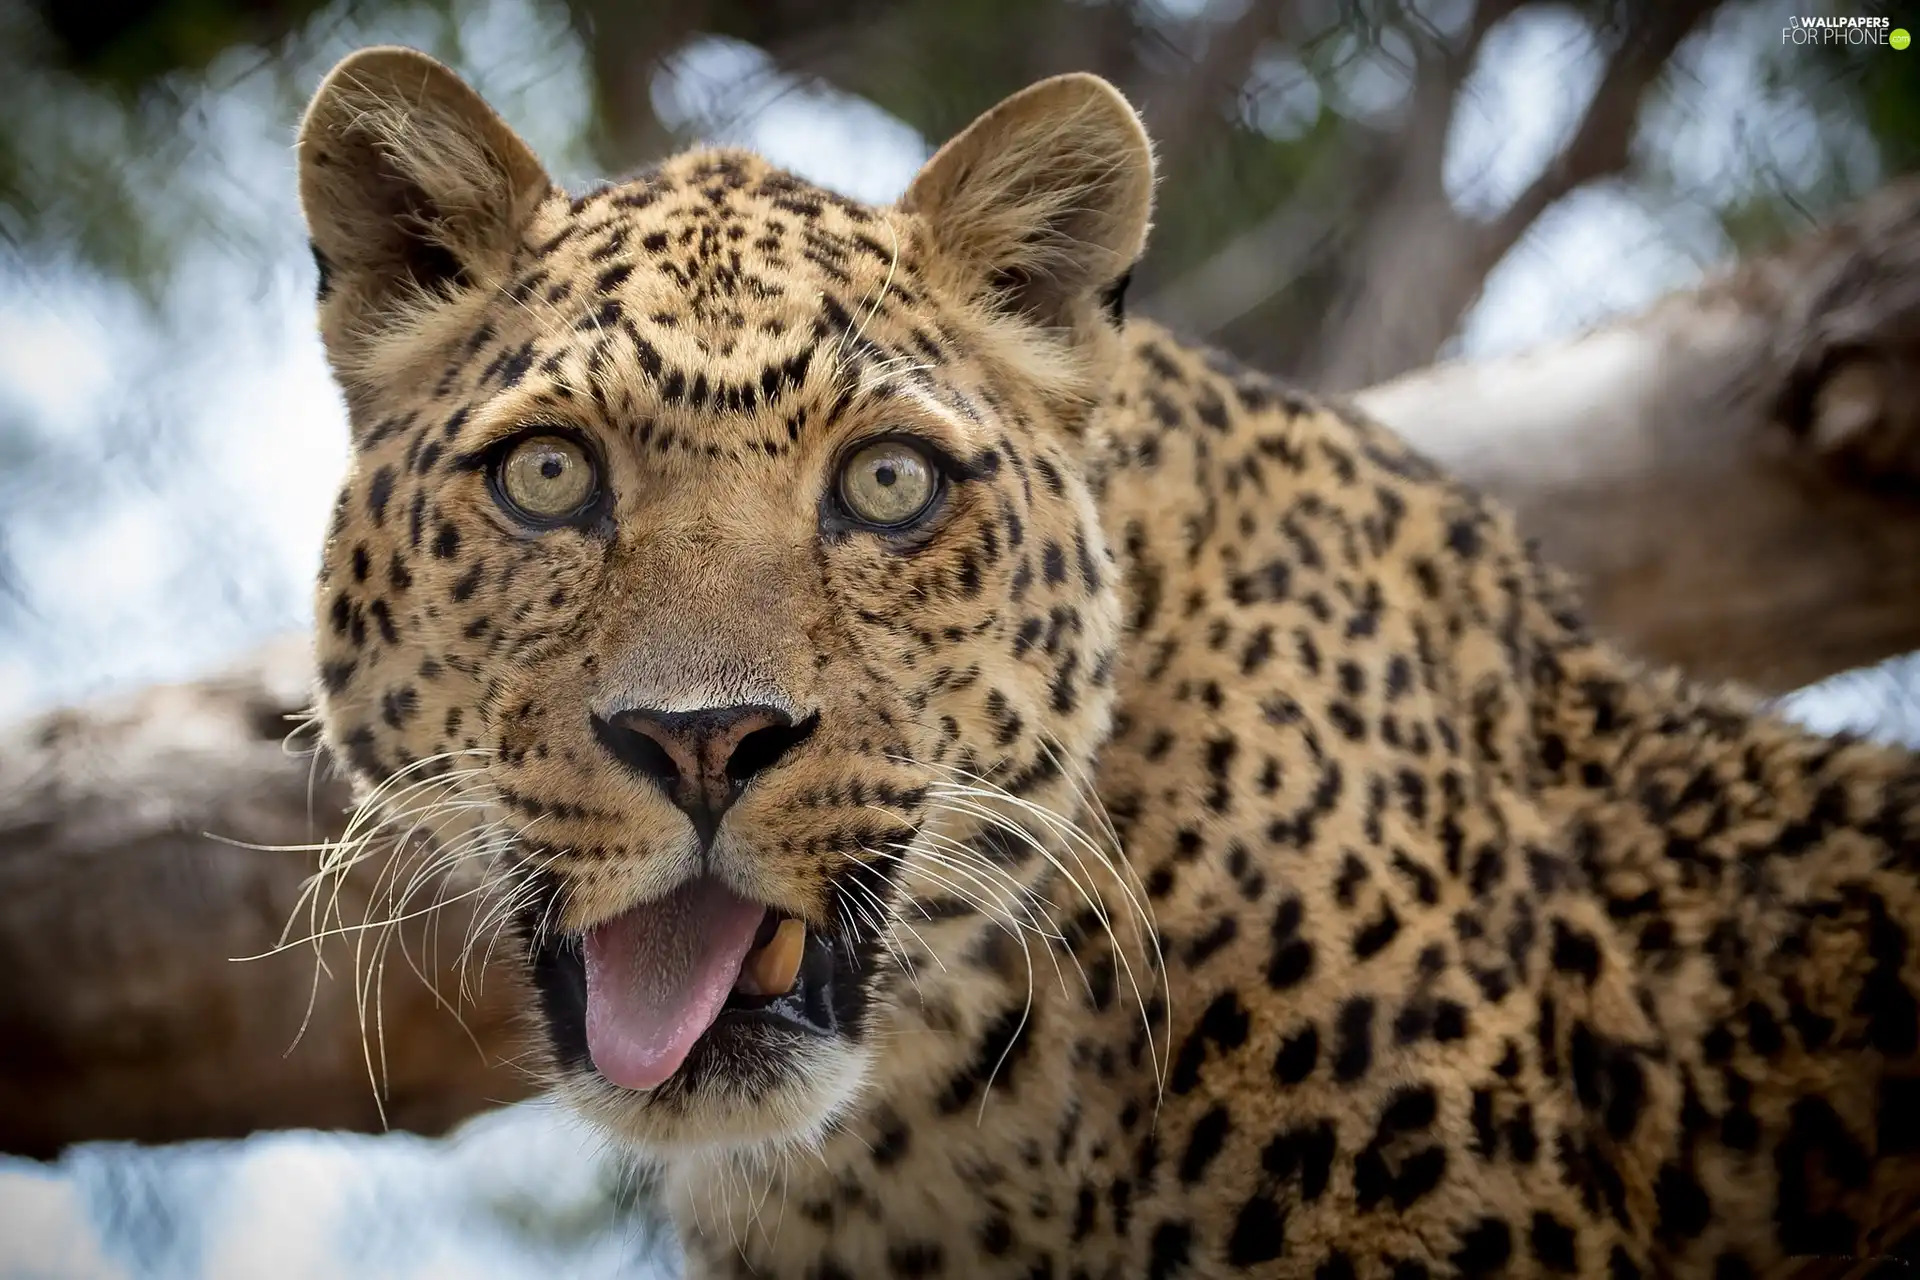 Tounge, Leopards, The look